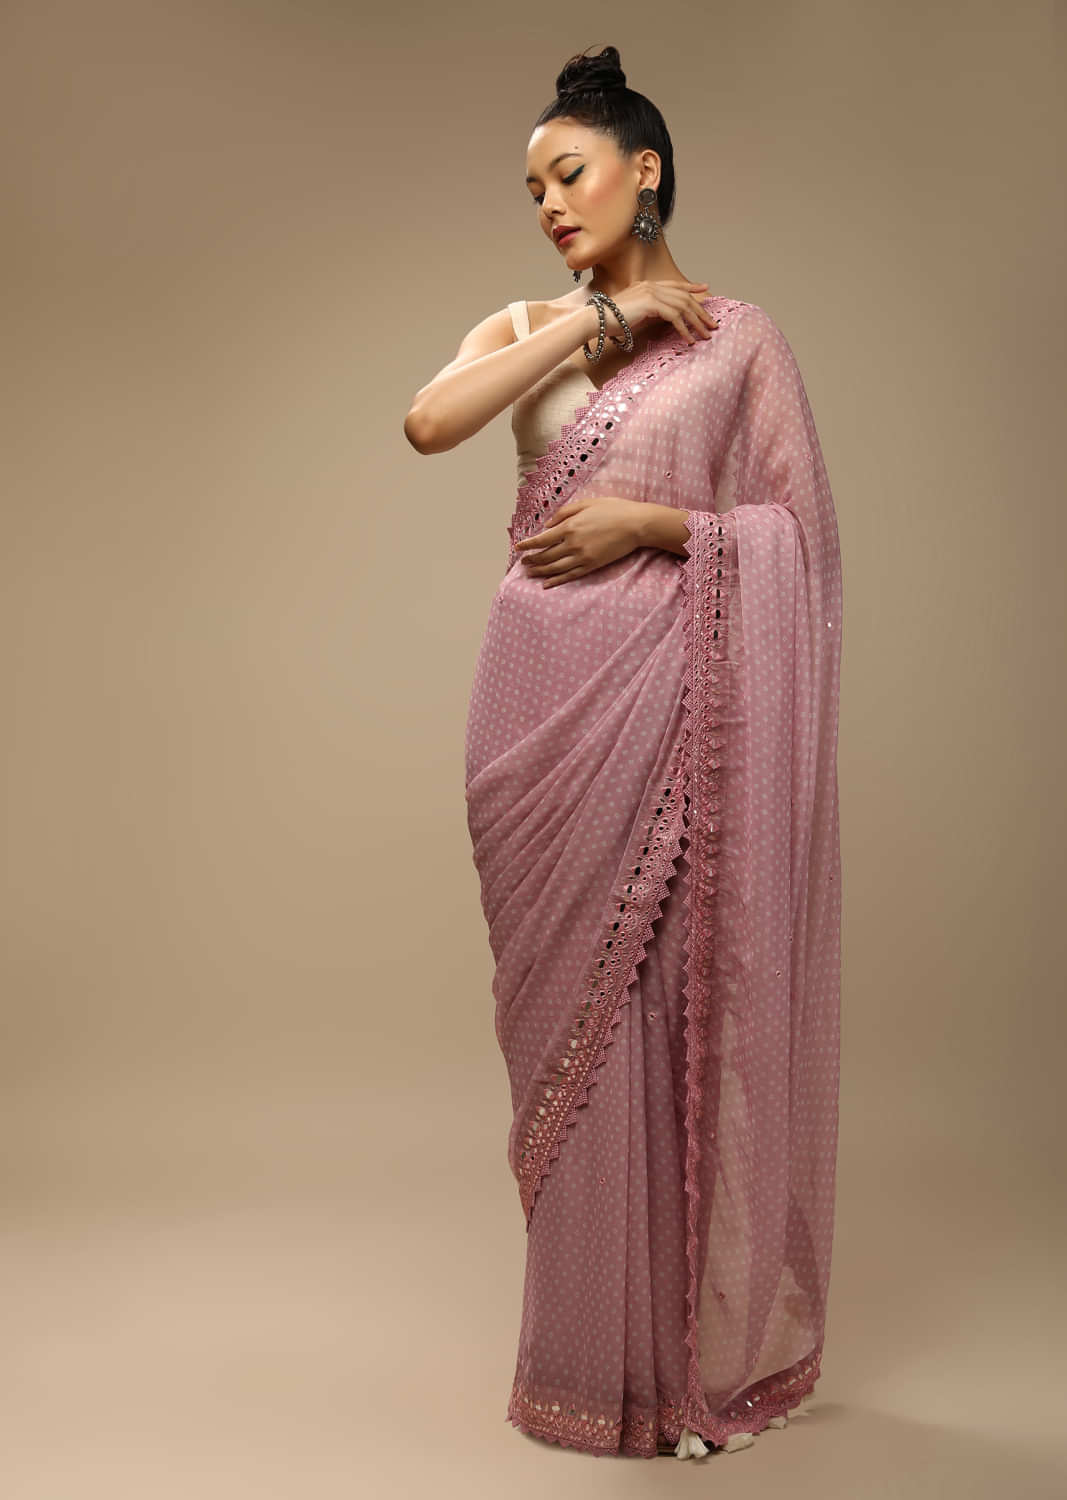 Pink Lavender Bandhani Saree In Georgette With Mirror Embroidered Border